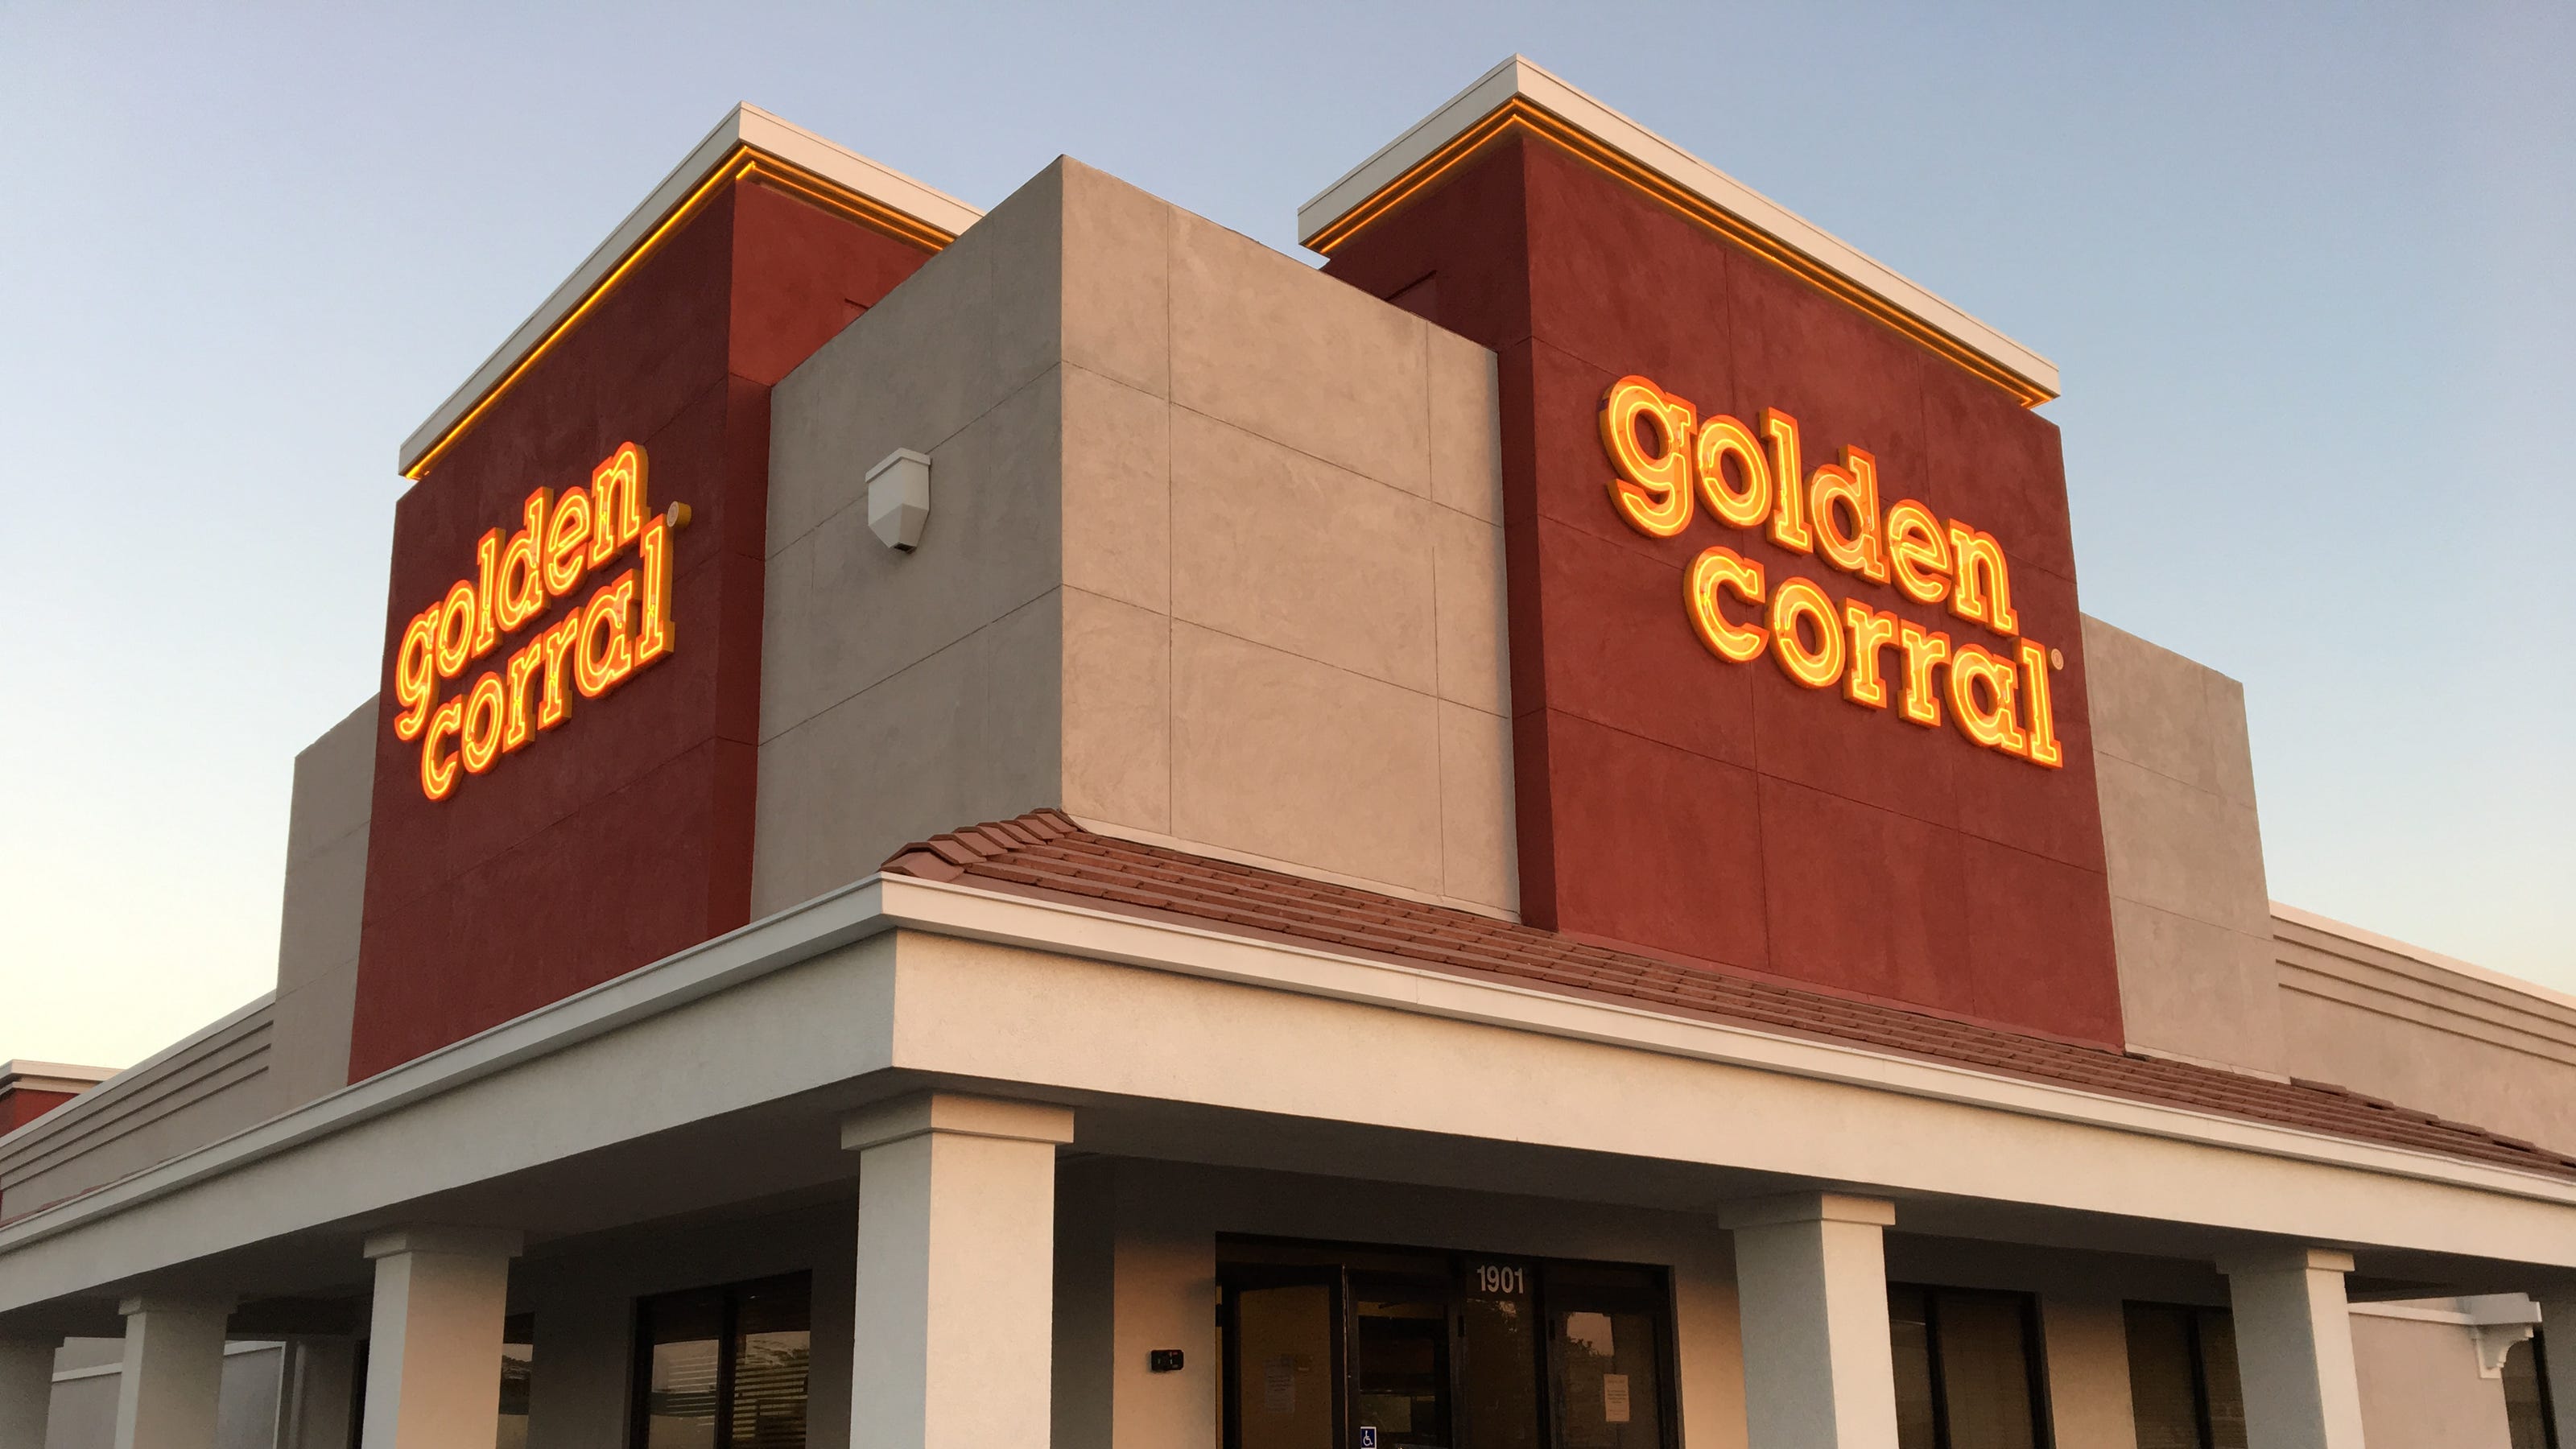 all-you-can-eat-golden-corral-restaurant-to-open-in-oxnard